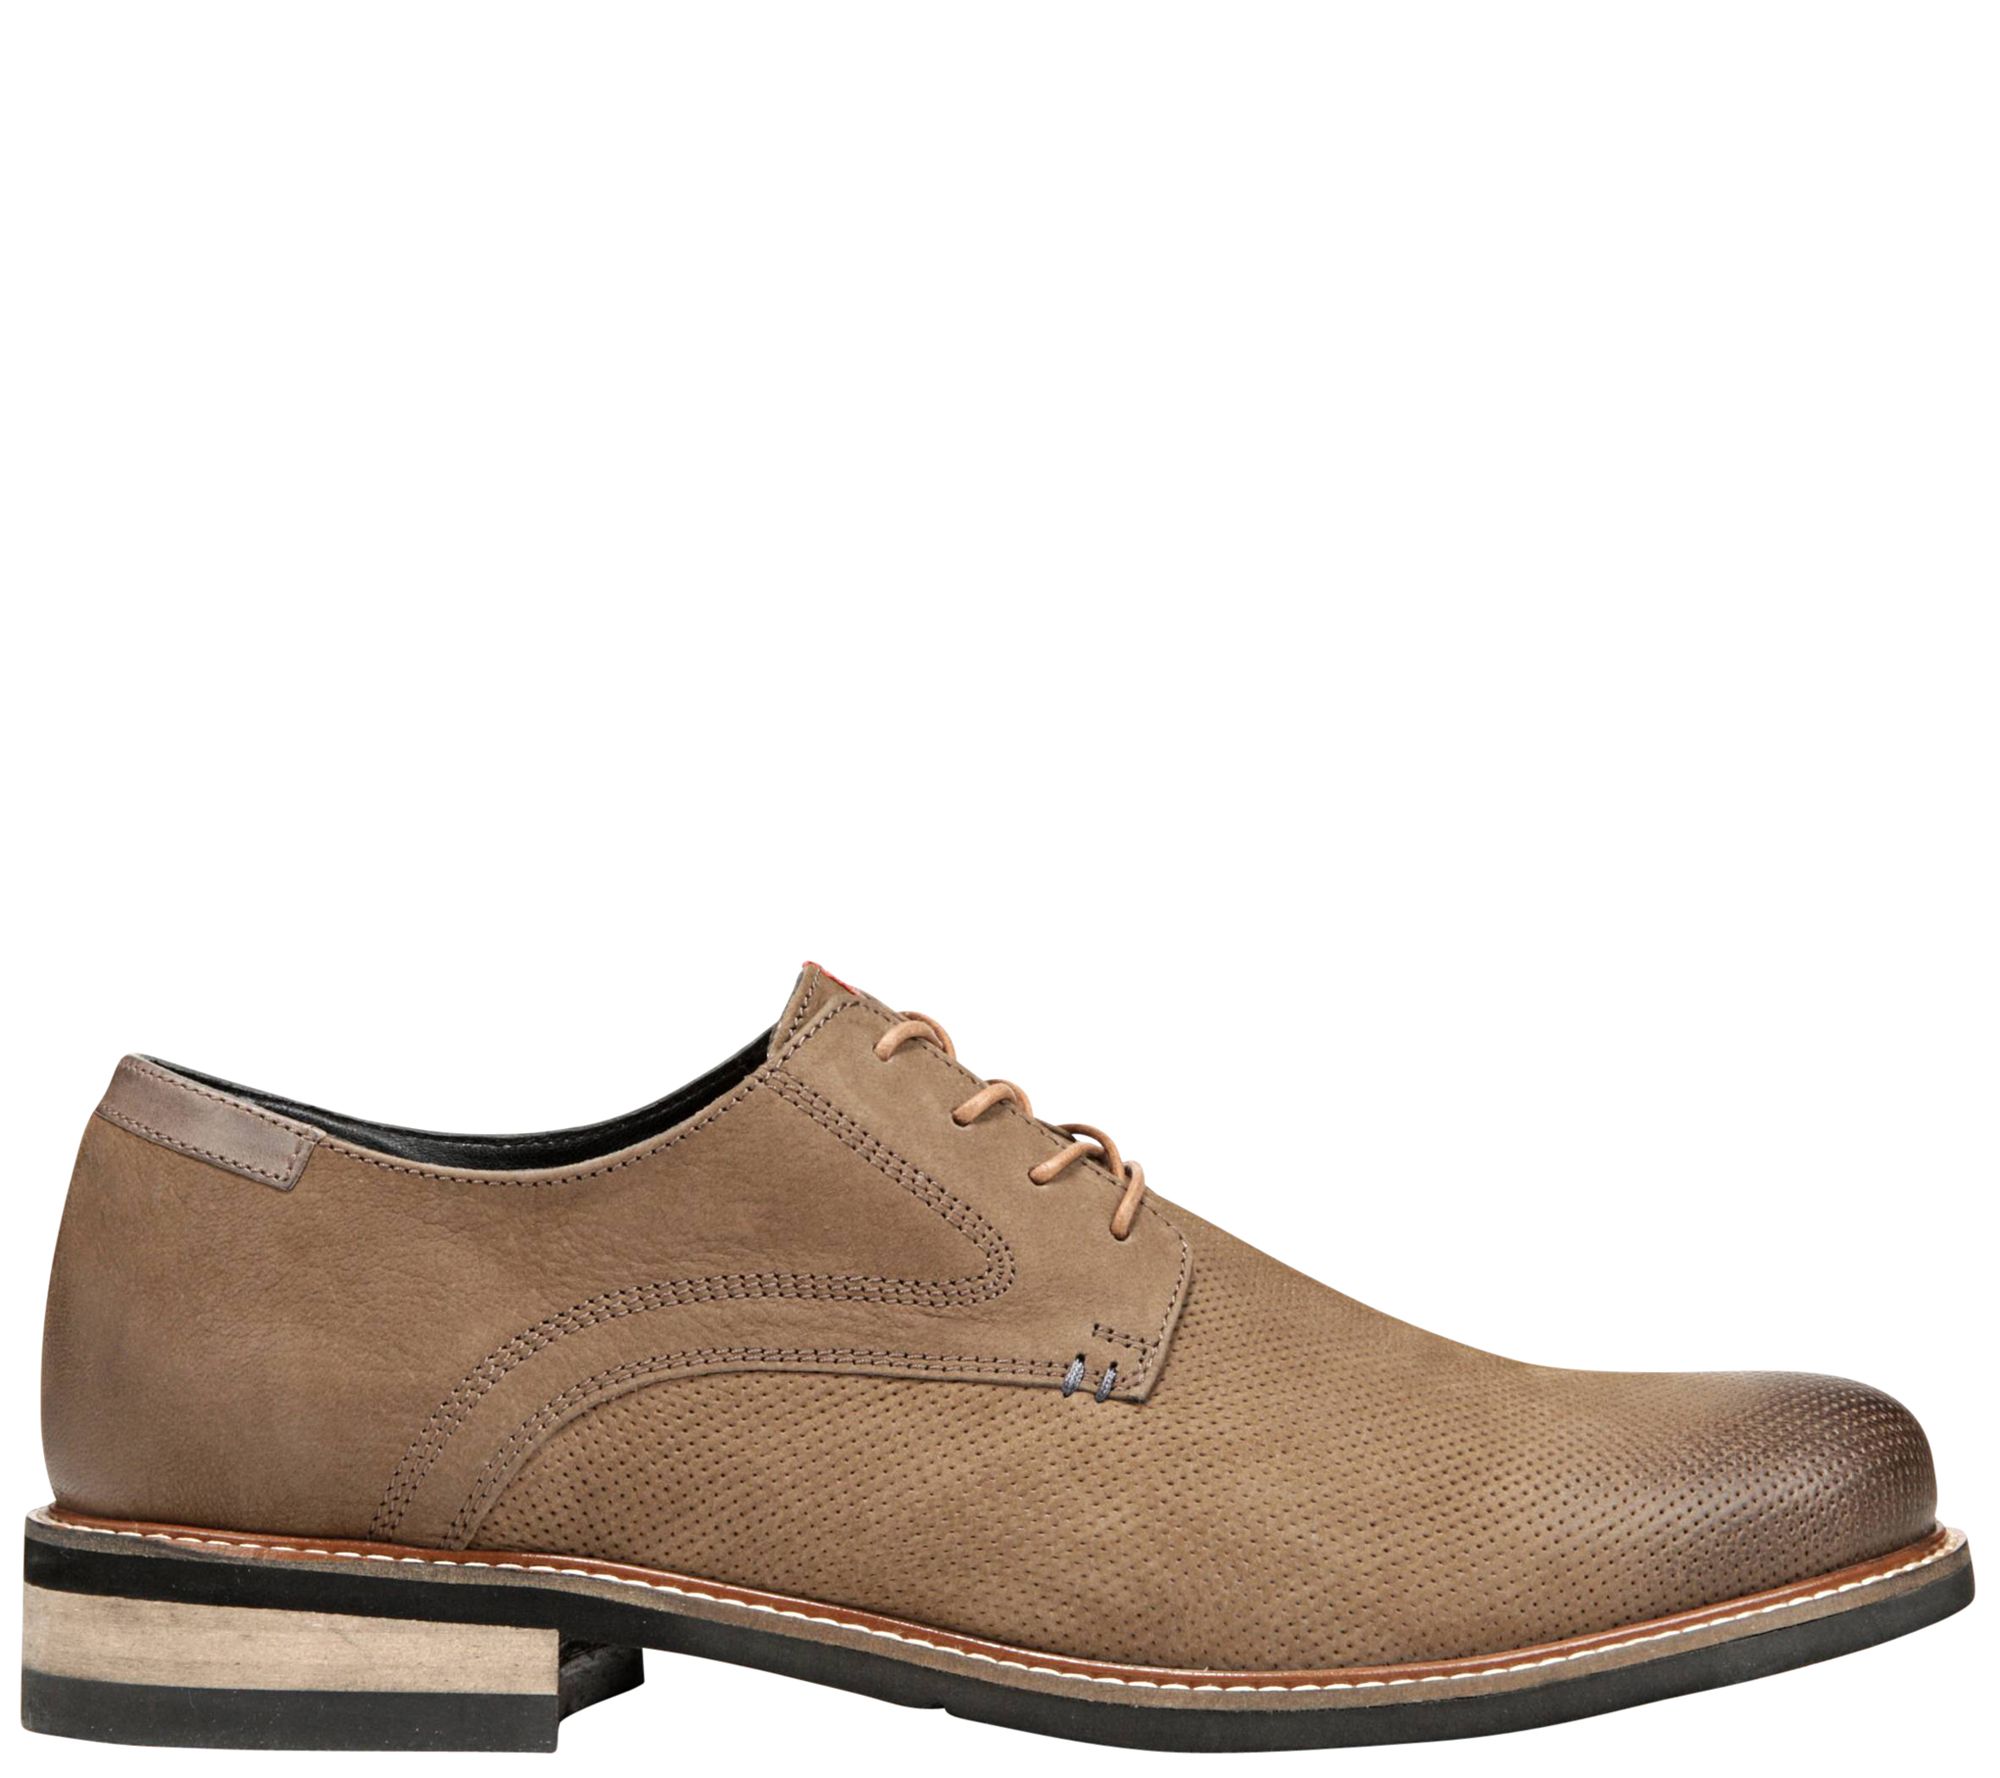 Dr. Scholl's Men's Elevated Leather Oxfords - Weekly - QVC.com